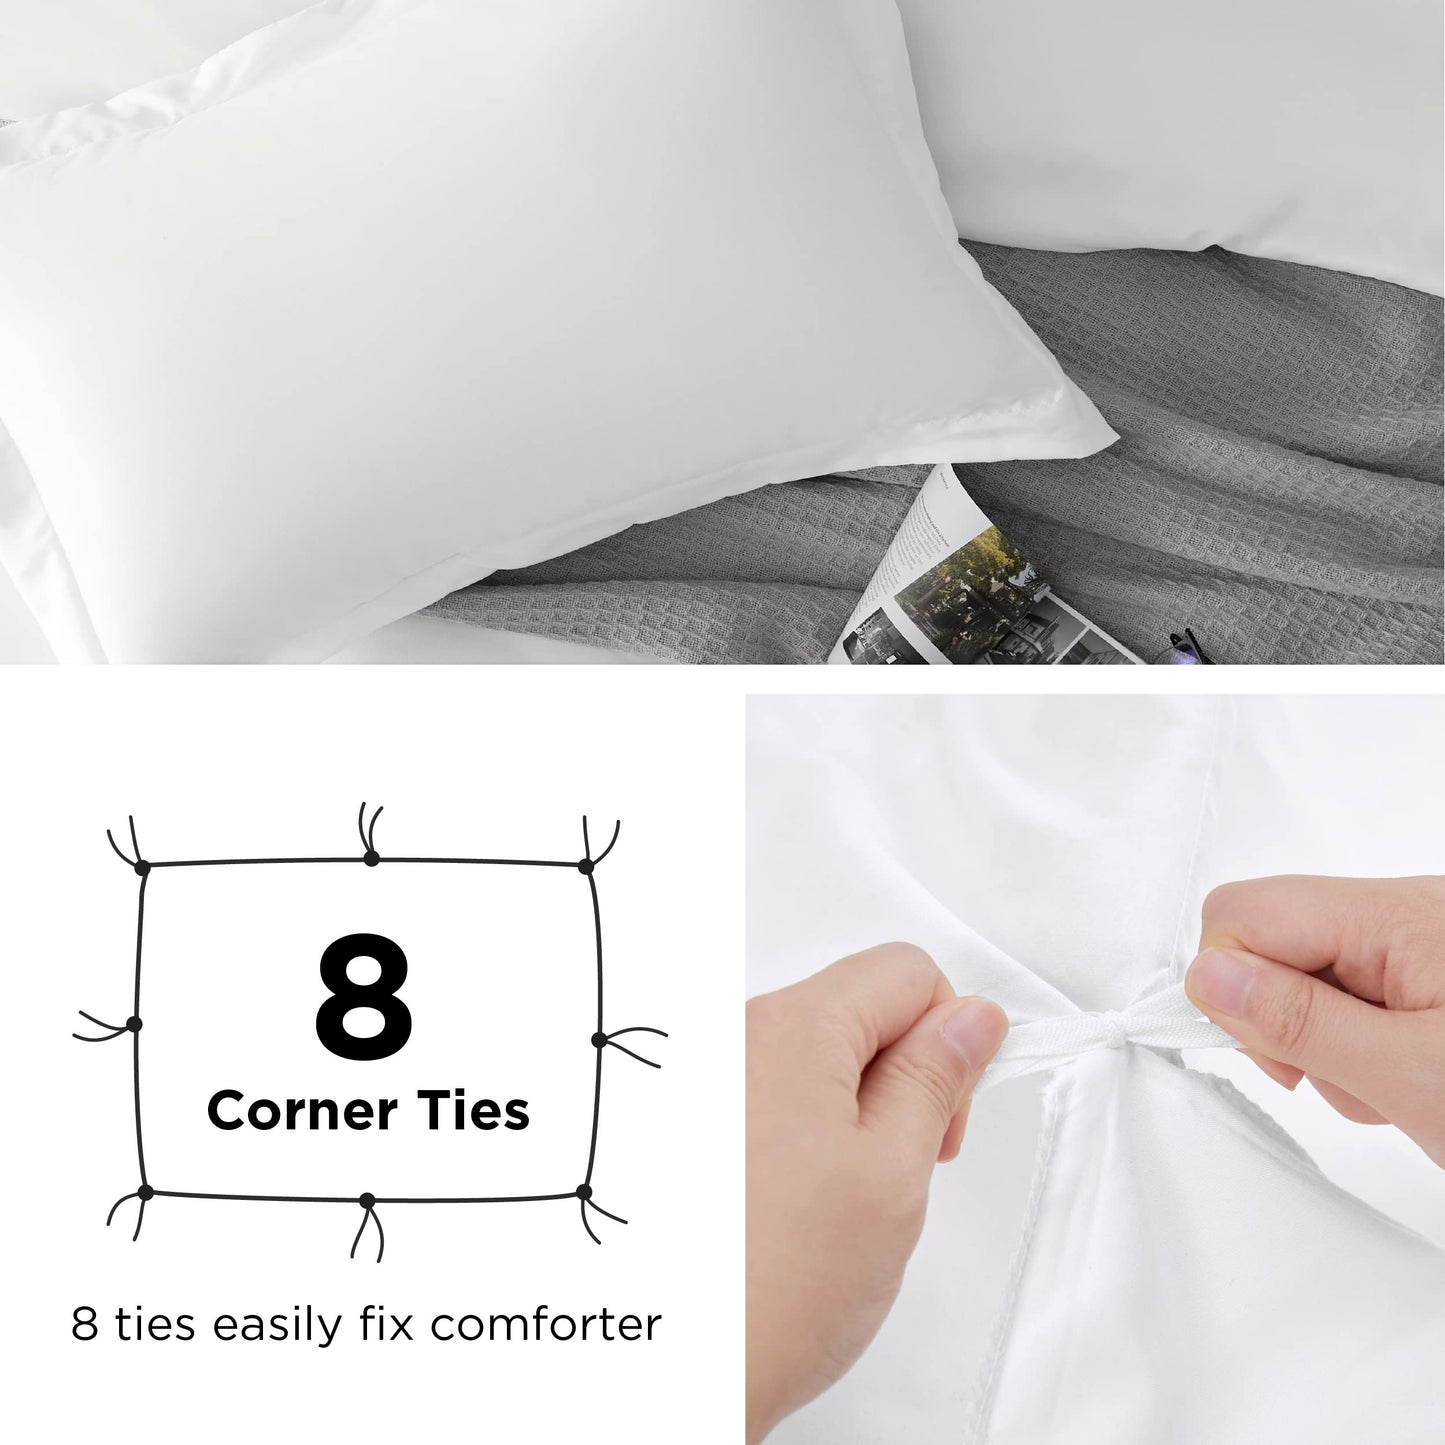 Bedsure White Duvet Cover Queen Size - Soft Double Brushed Duvet Cover for Kids with Zipper Closure, 3 Pieces, Includes 1 Duvet Cover (90"x90") & 2 Pillow Shams, NO Comforter